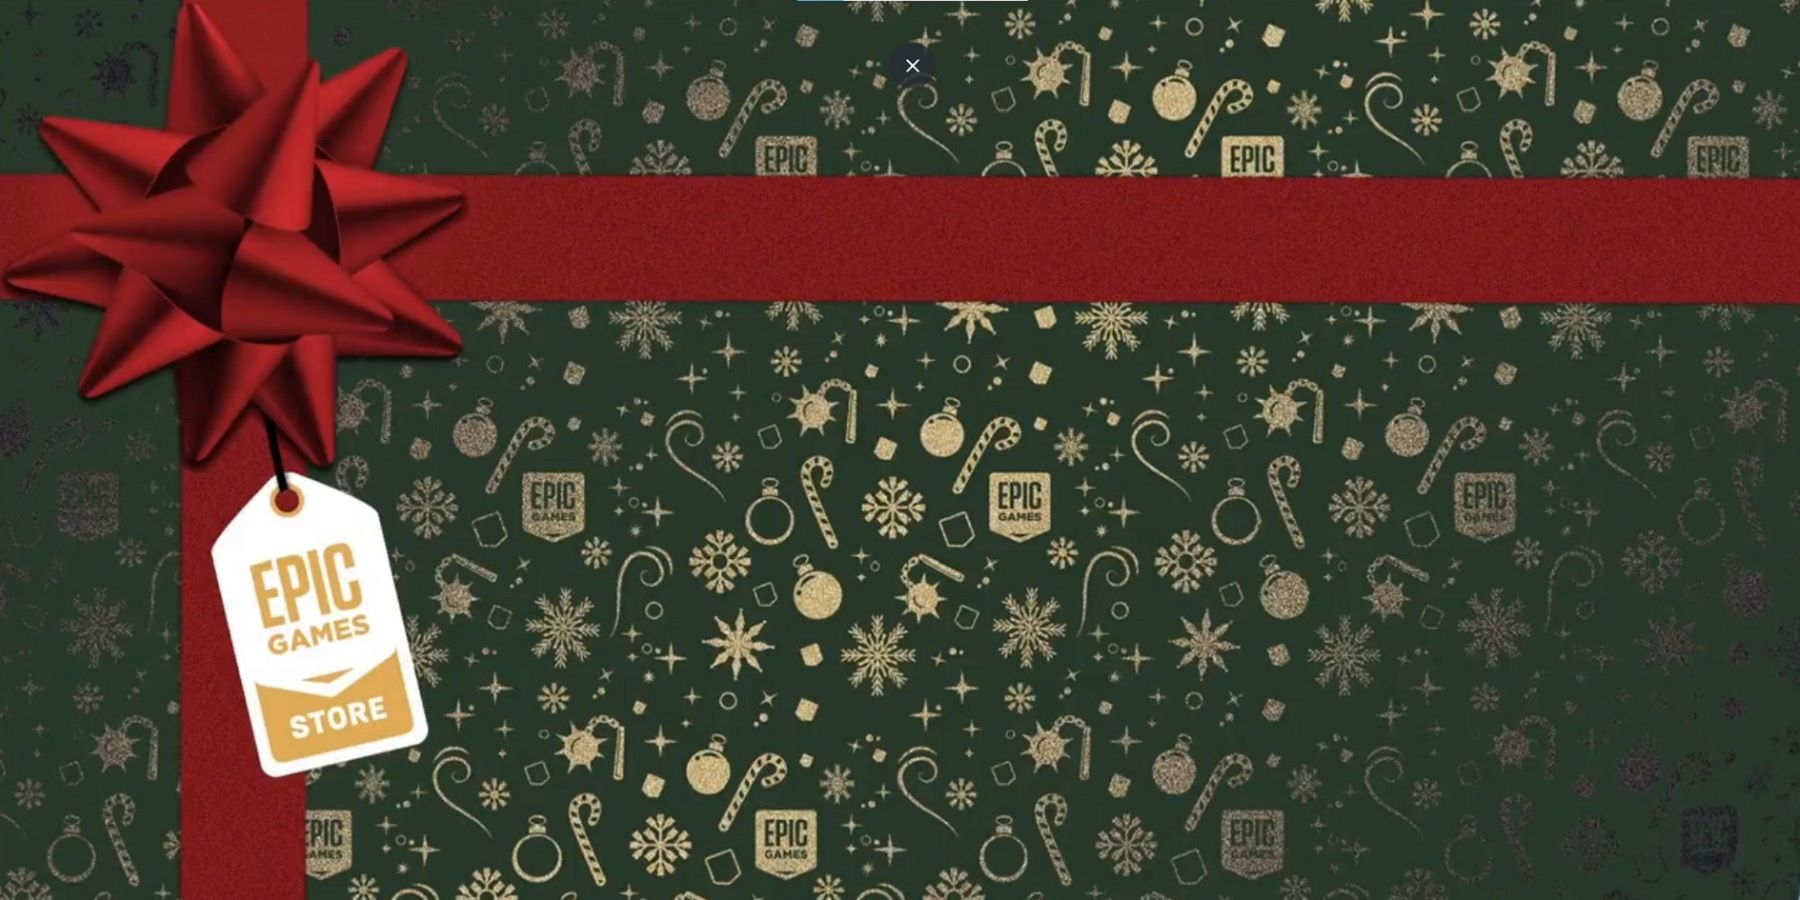 epic games store green wrapping paper